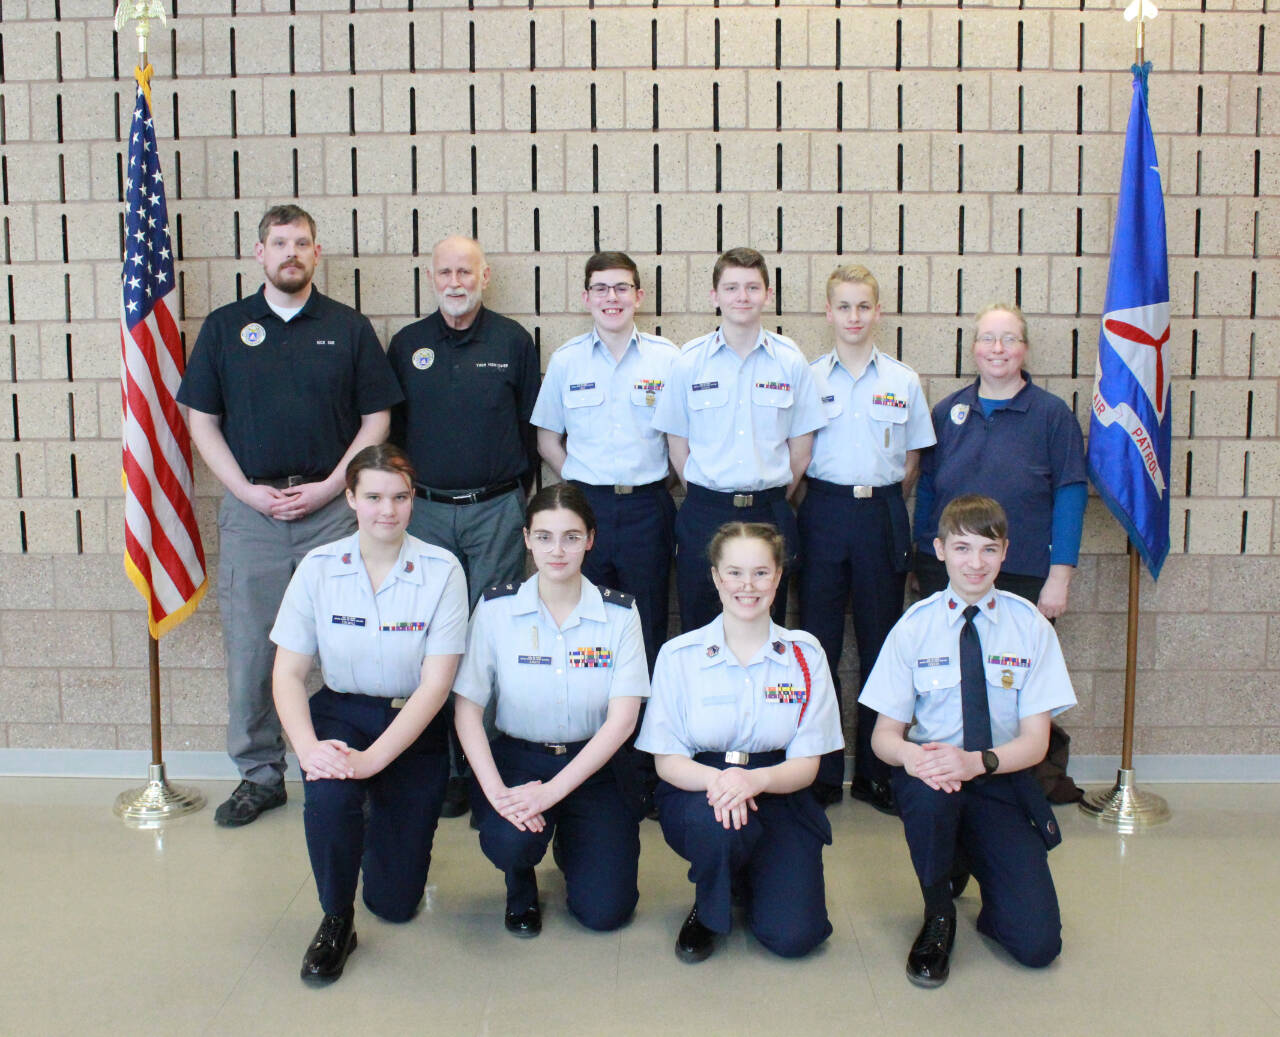 Photo courtesy of Madeline Patterson/Dungeness Composite Squadron / The Dungeness Cadet Competition team and support staff compete at the Washington Wing Cadet Competition in February. Pictured are (back row, from left) Capt. Nick Sue, Lt. Thom Hightower, C/SMSgt Reilly Sue, C/TSgt Trenton Downs, C/SMSgt Joseph Henninger and SM Elizabeth Nickel, with (front row, from left) C/TSgt Hannah Colwill, C/2d Lt. Faith Amaya, C/CMSgt Genna Nickel and C/TSgt Alex Creery.